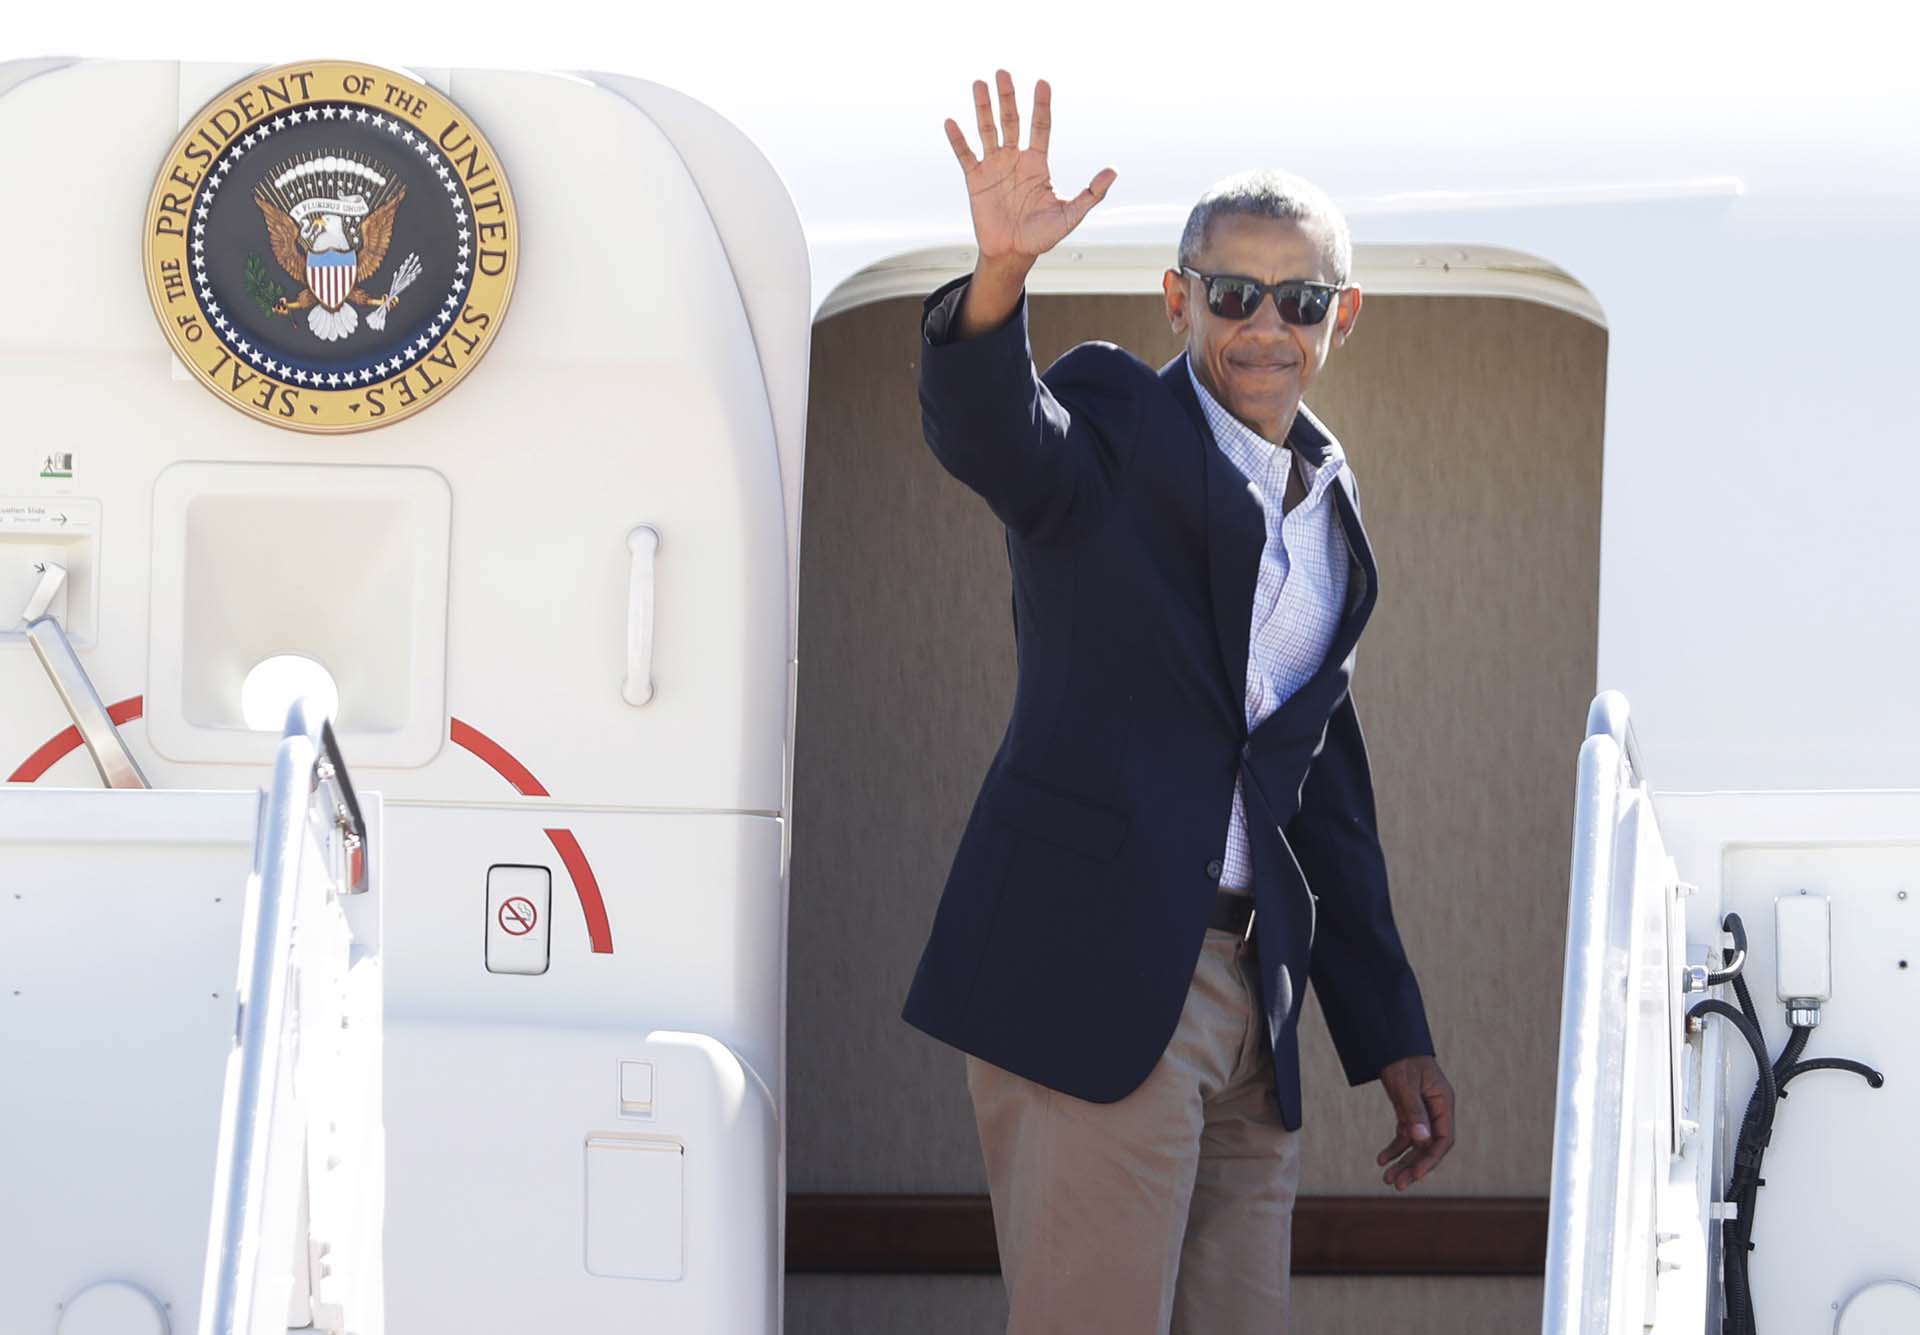 President Barack Obama waves as he boards the Air Force One at Andrews Air Force Base, Md., Tuesday, Aug. 23, 2016, for a trip to Baton Rouge, La. Obama is traveling to Baton Rouge, La., where he will get a first-hand look at the impact of the devastating floods on the community. (AP Photo/Manuel Balce Ceneta)